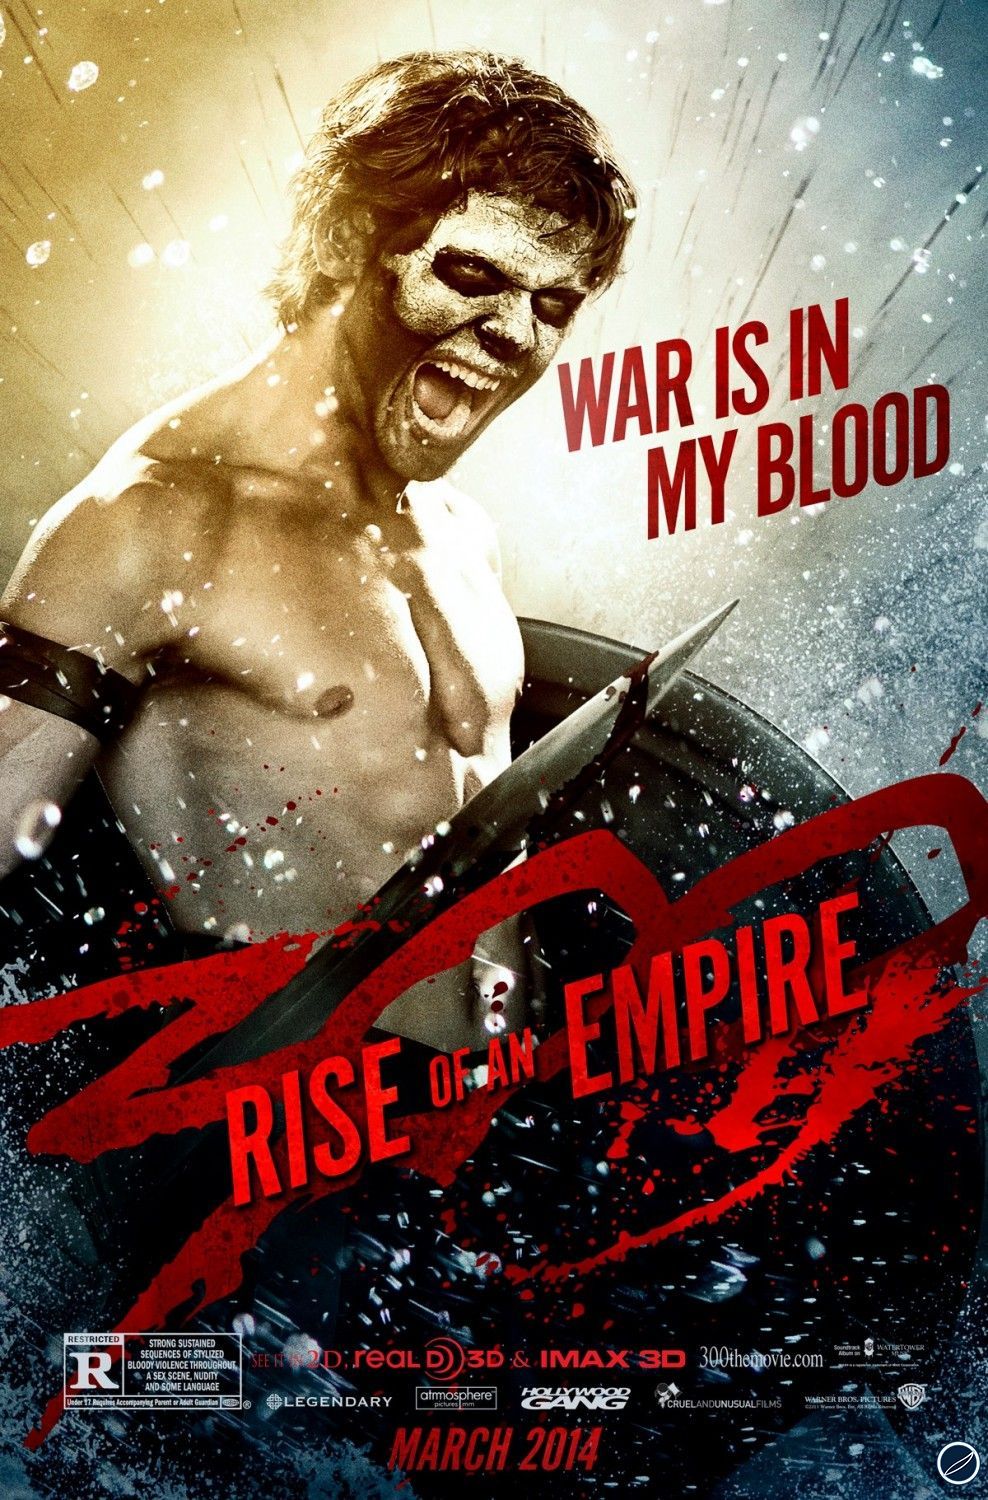 300 rise of an empire movie cast